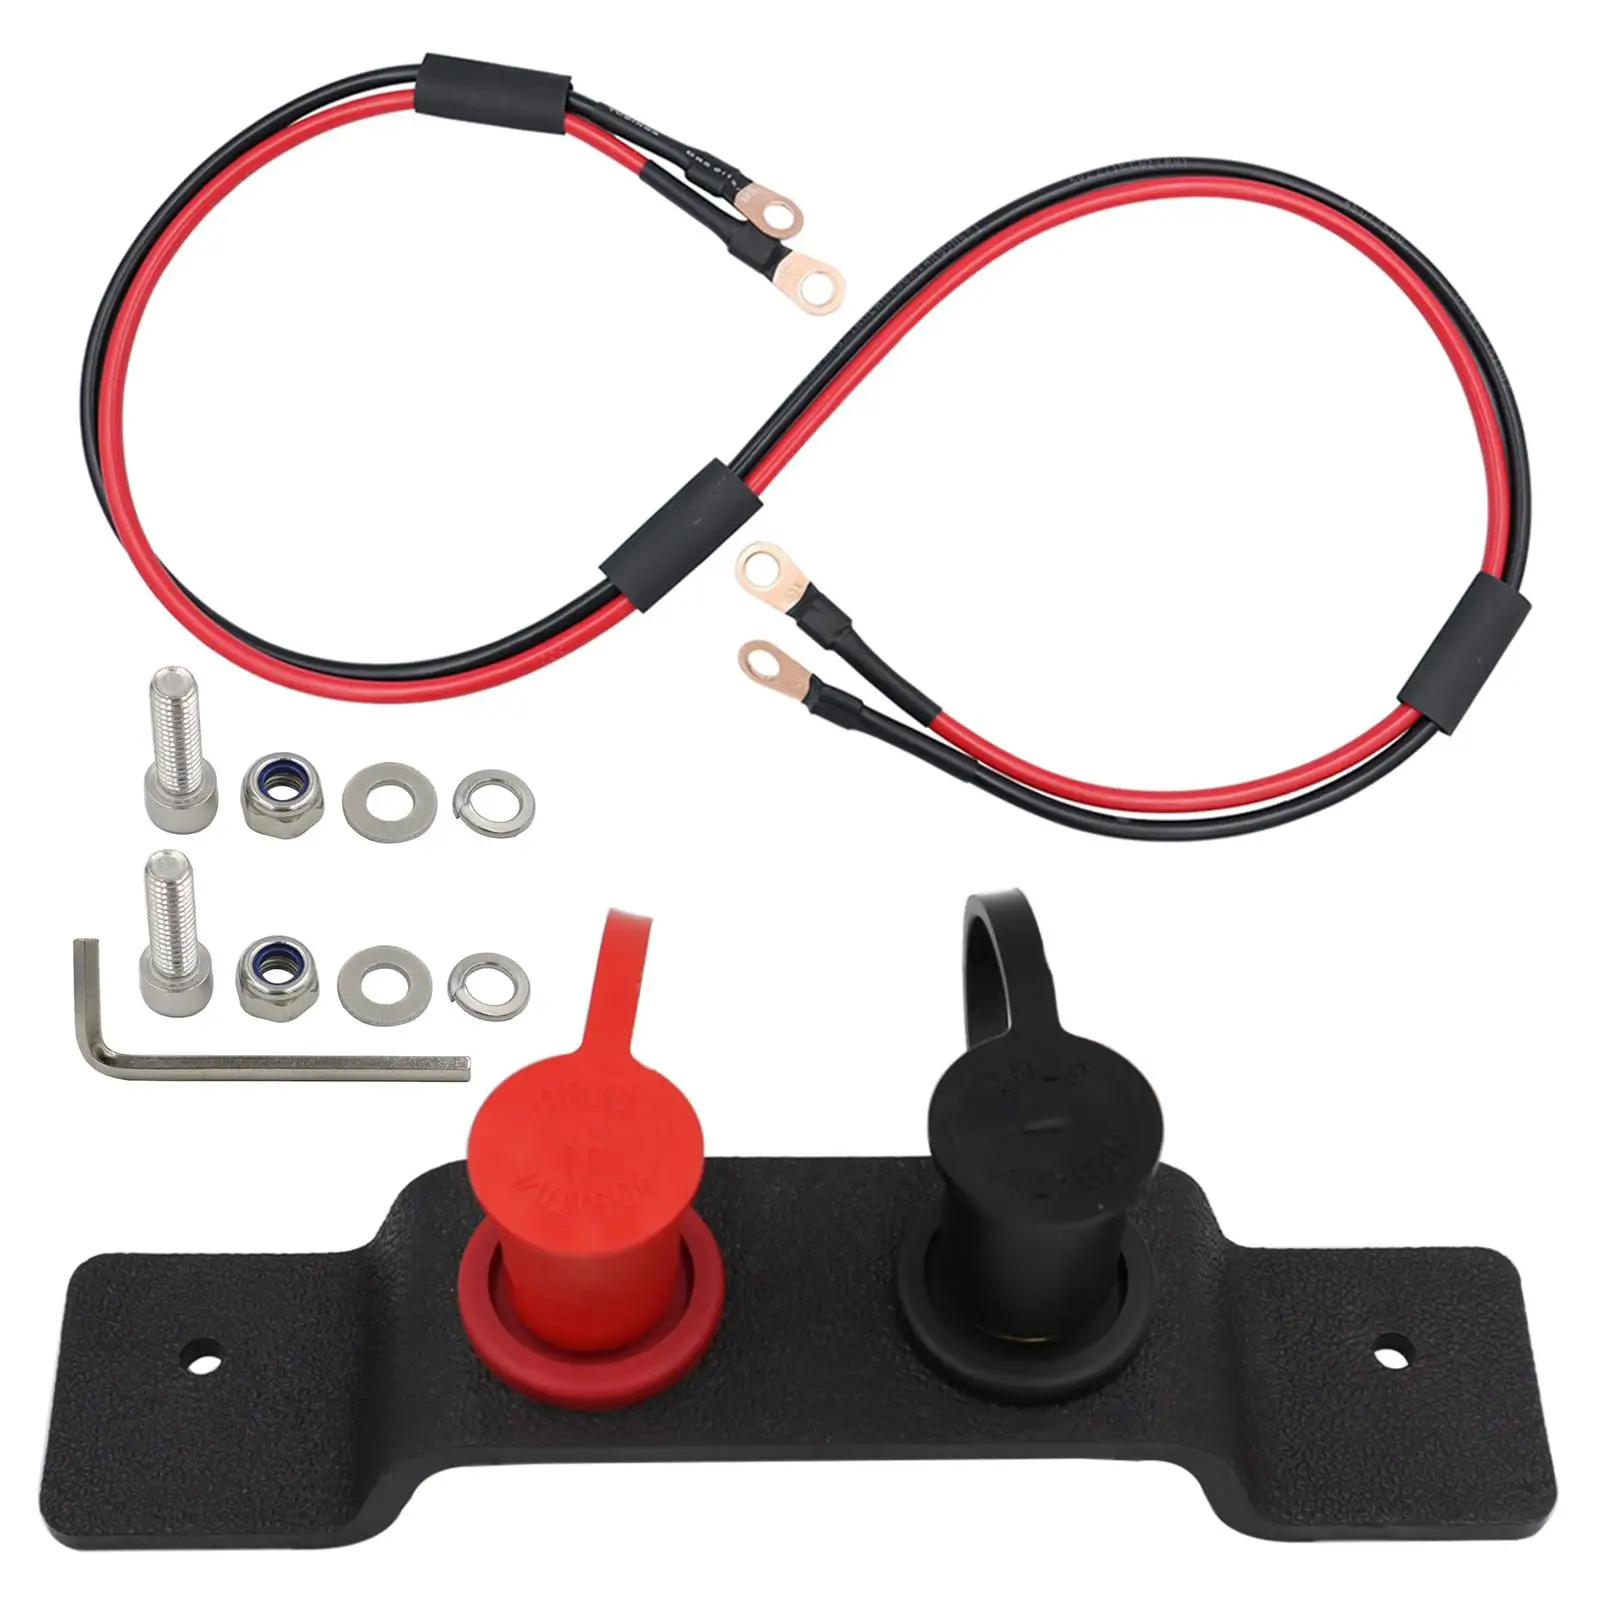 Battery Jump Post Starter Terminals for RZR Racing Cars